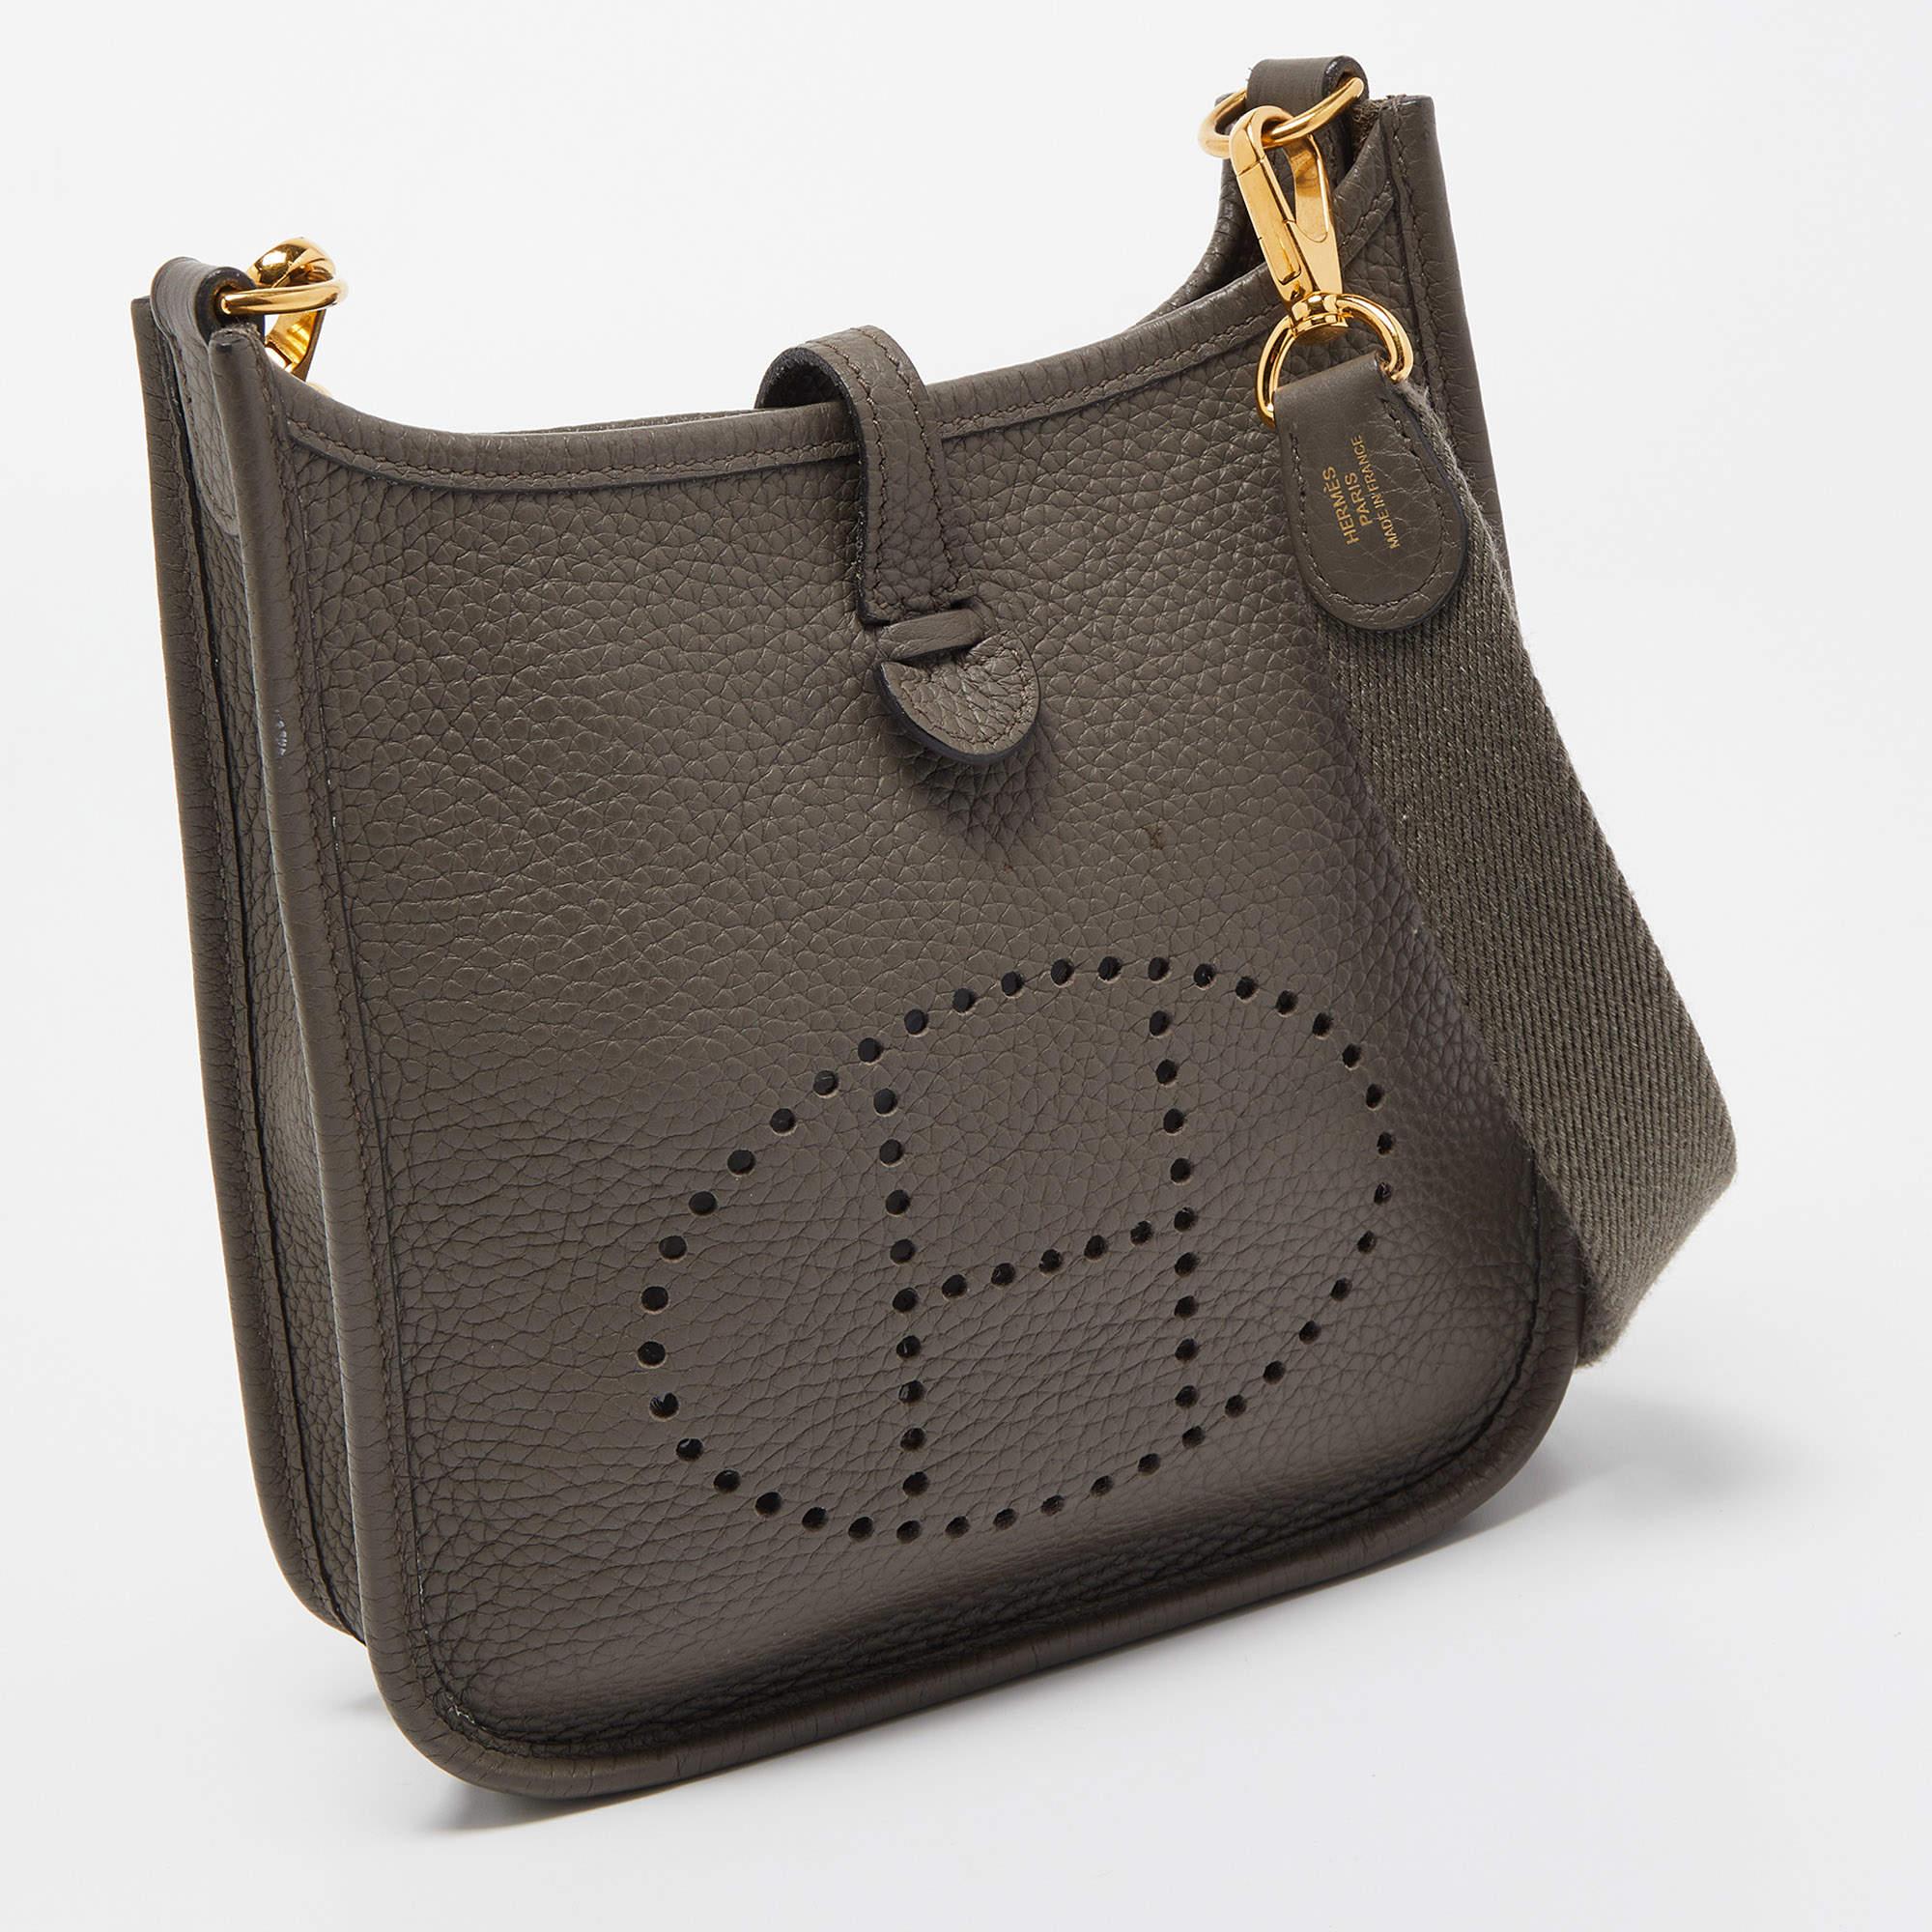 The Evelyne is another investment-worthy bag from Hermès. This one here is crafted from Taurillon Clemence leather and detailed with the signature elements of the leather tab closure, the saddle-like shape, and the perforated H on the front. The bag